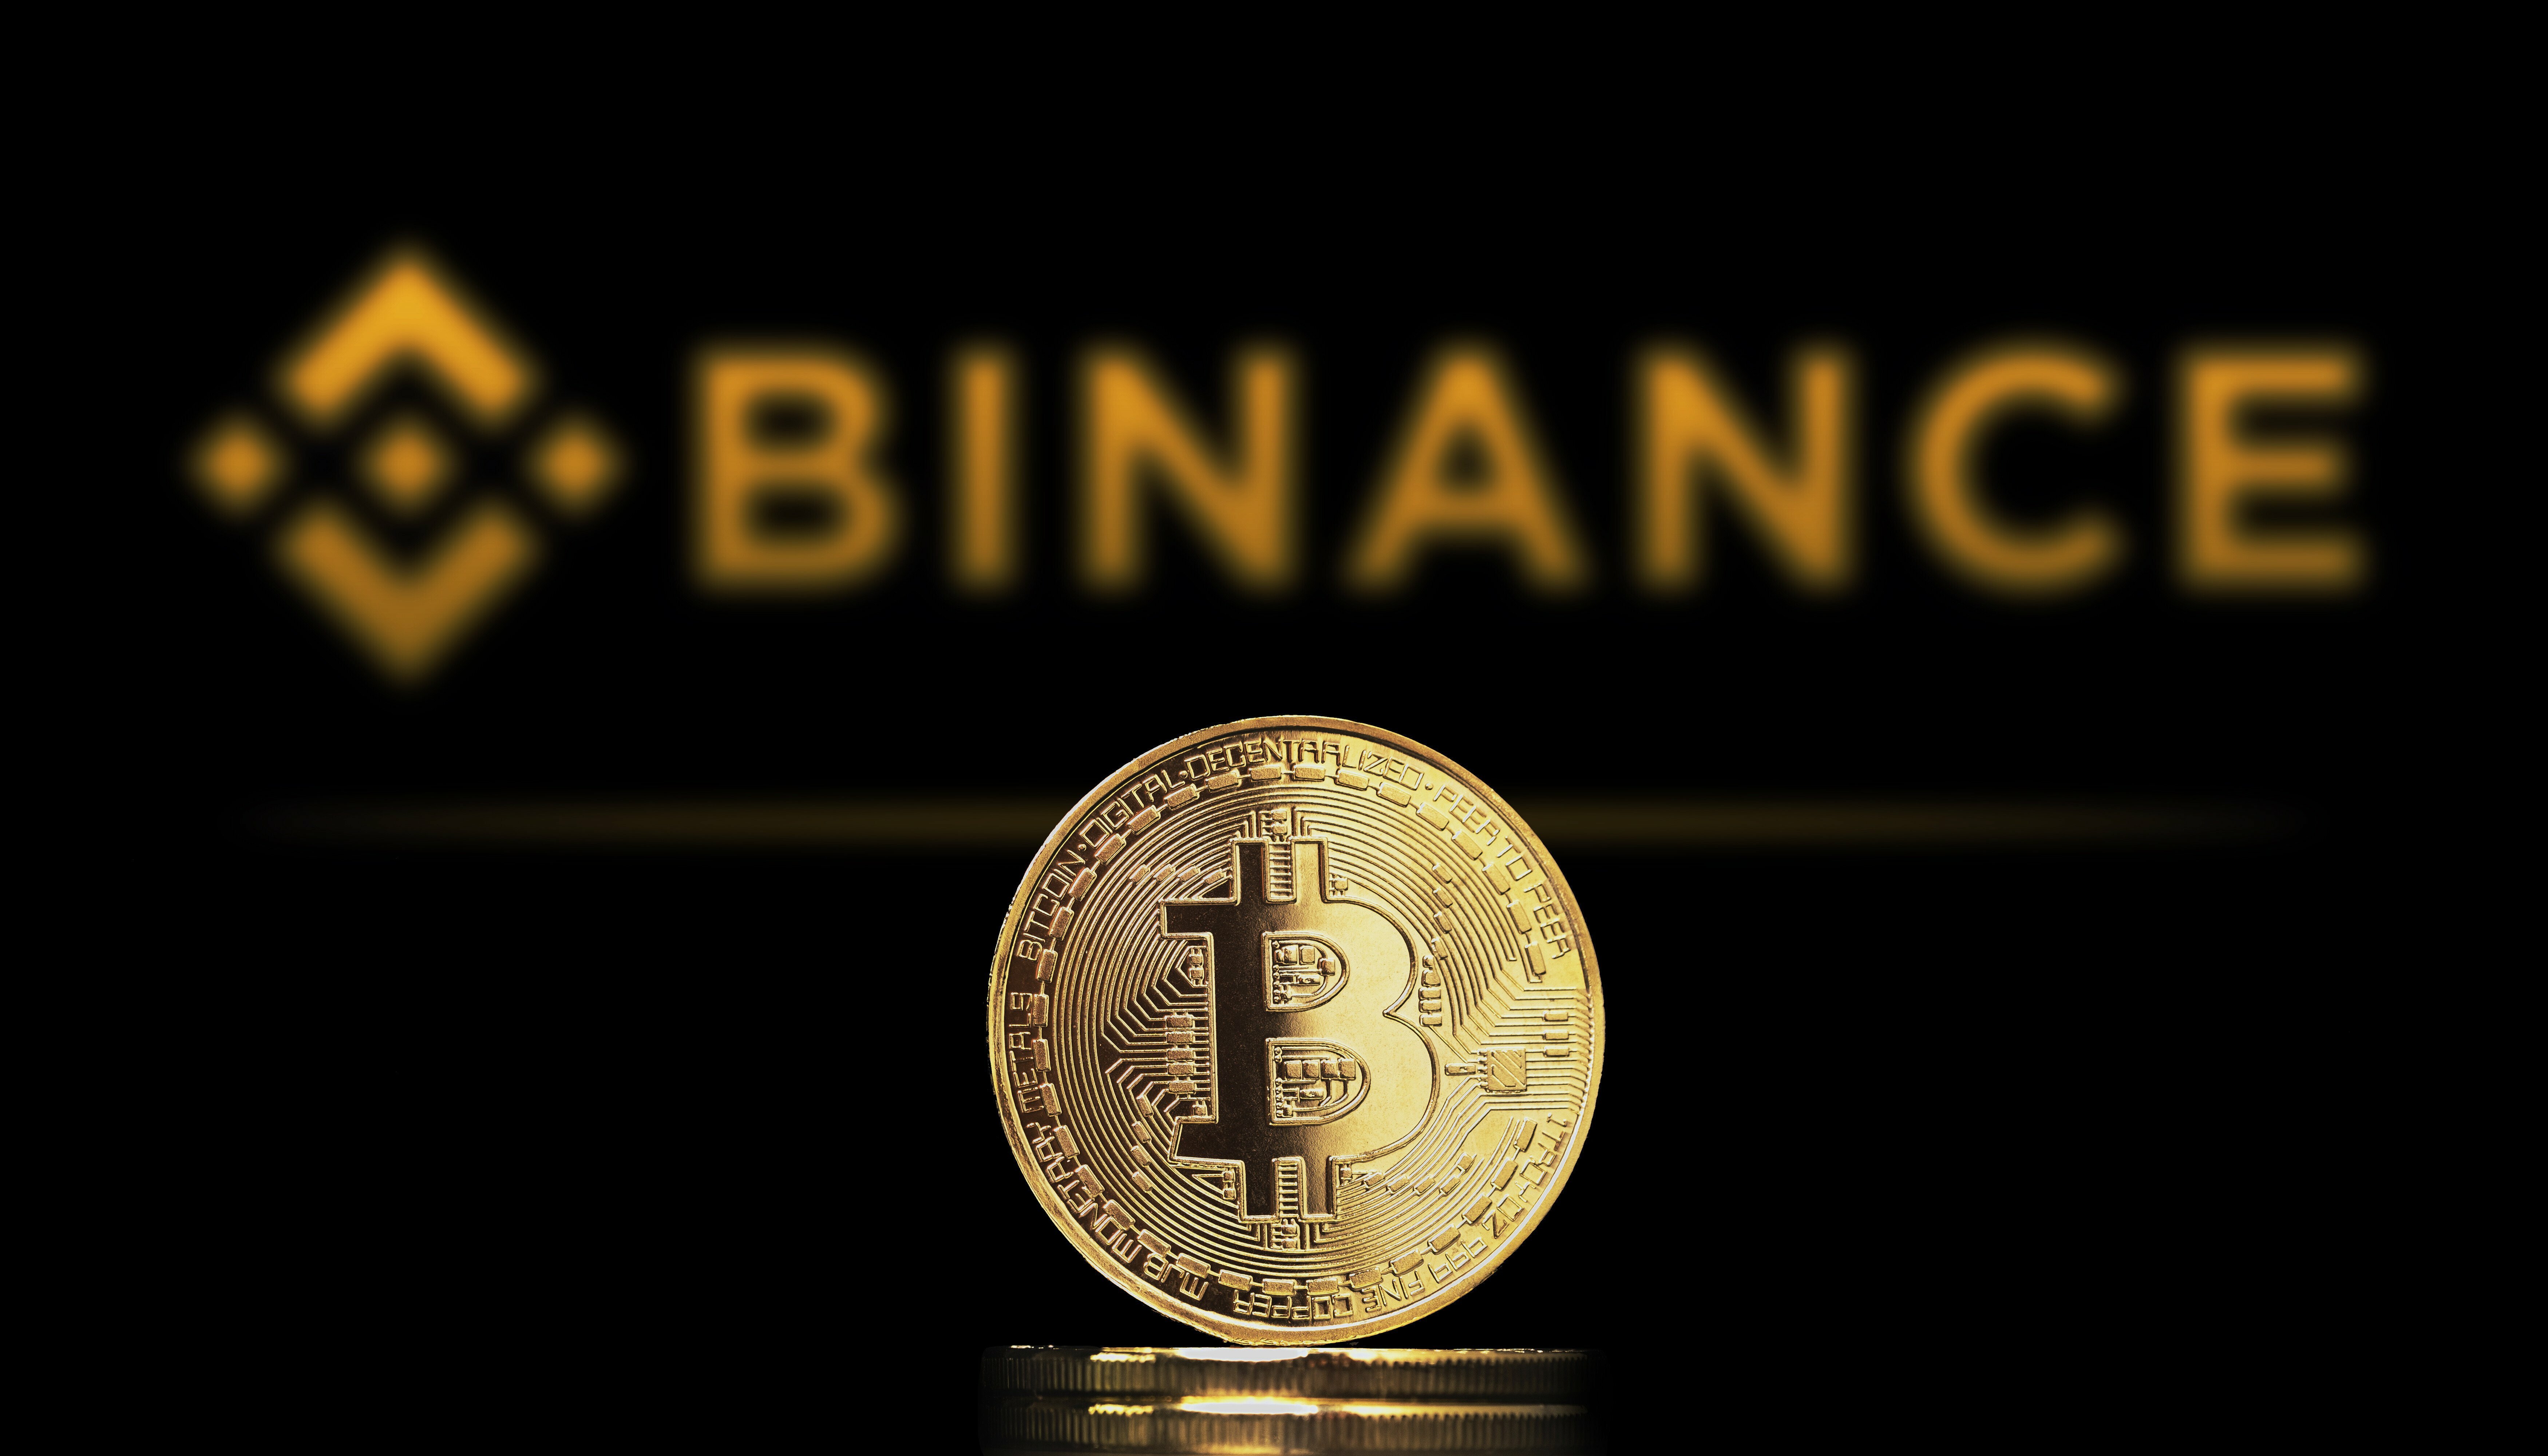 Binance Announces Alliance With Fiat Partners to Offer EUR Services – Here’s the Latest